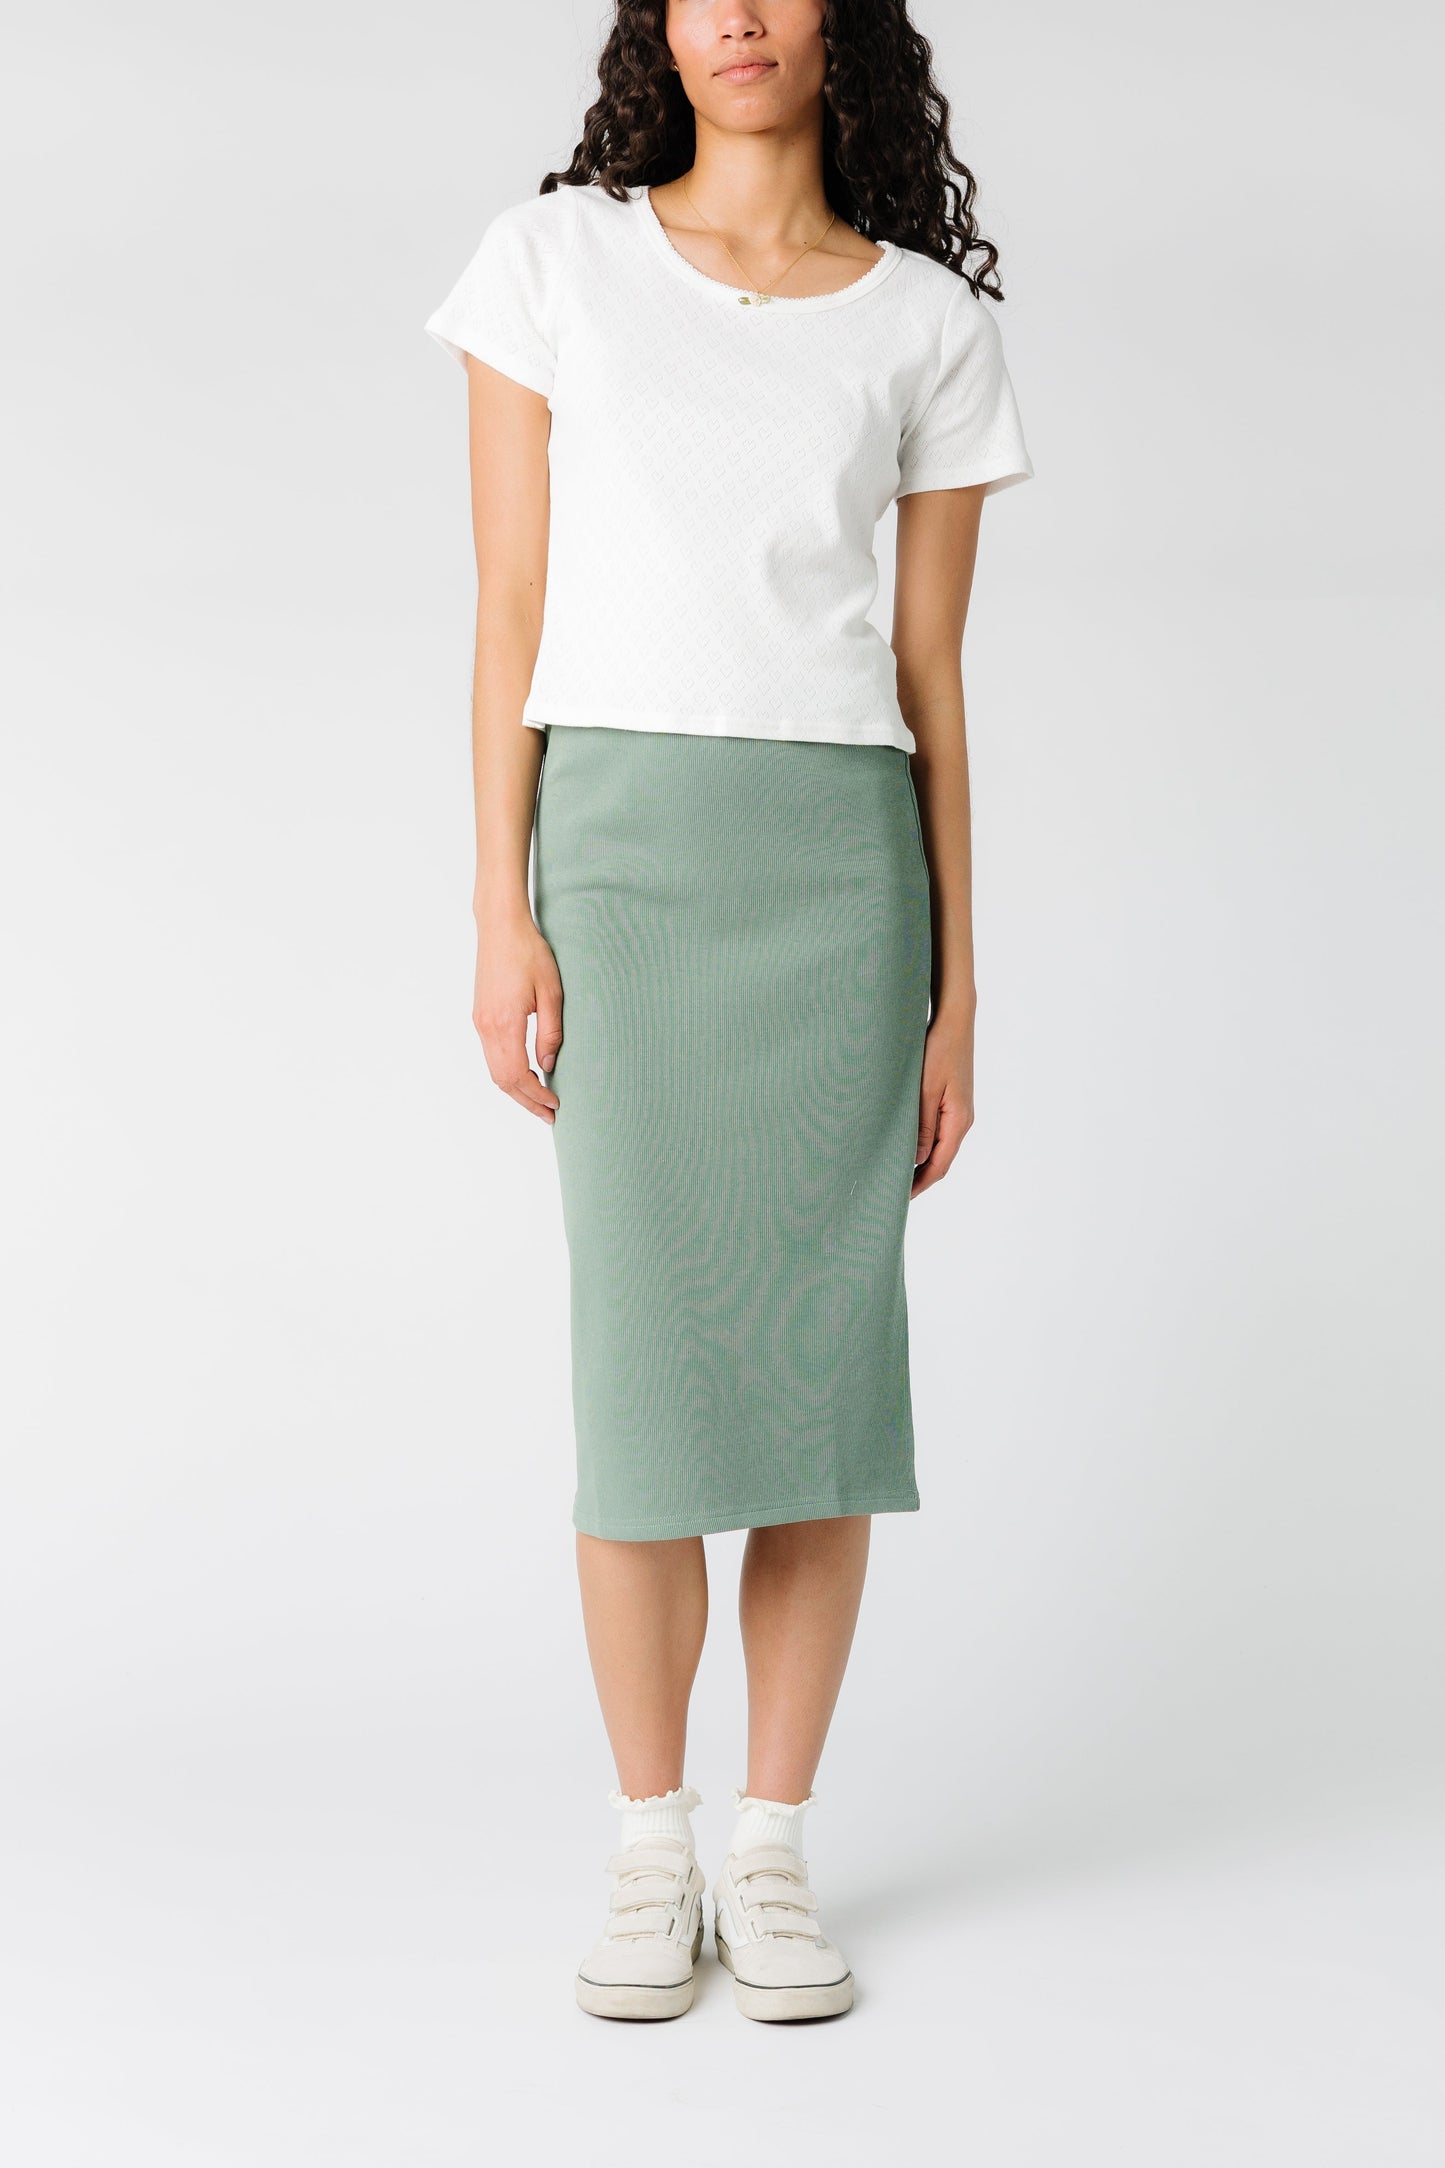 Brass & Roe The Go To Skirt - Dusty Sage WOMEN'S SKIRTS brass & roe 